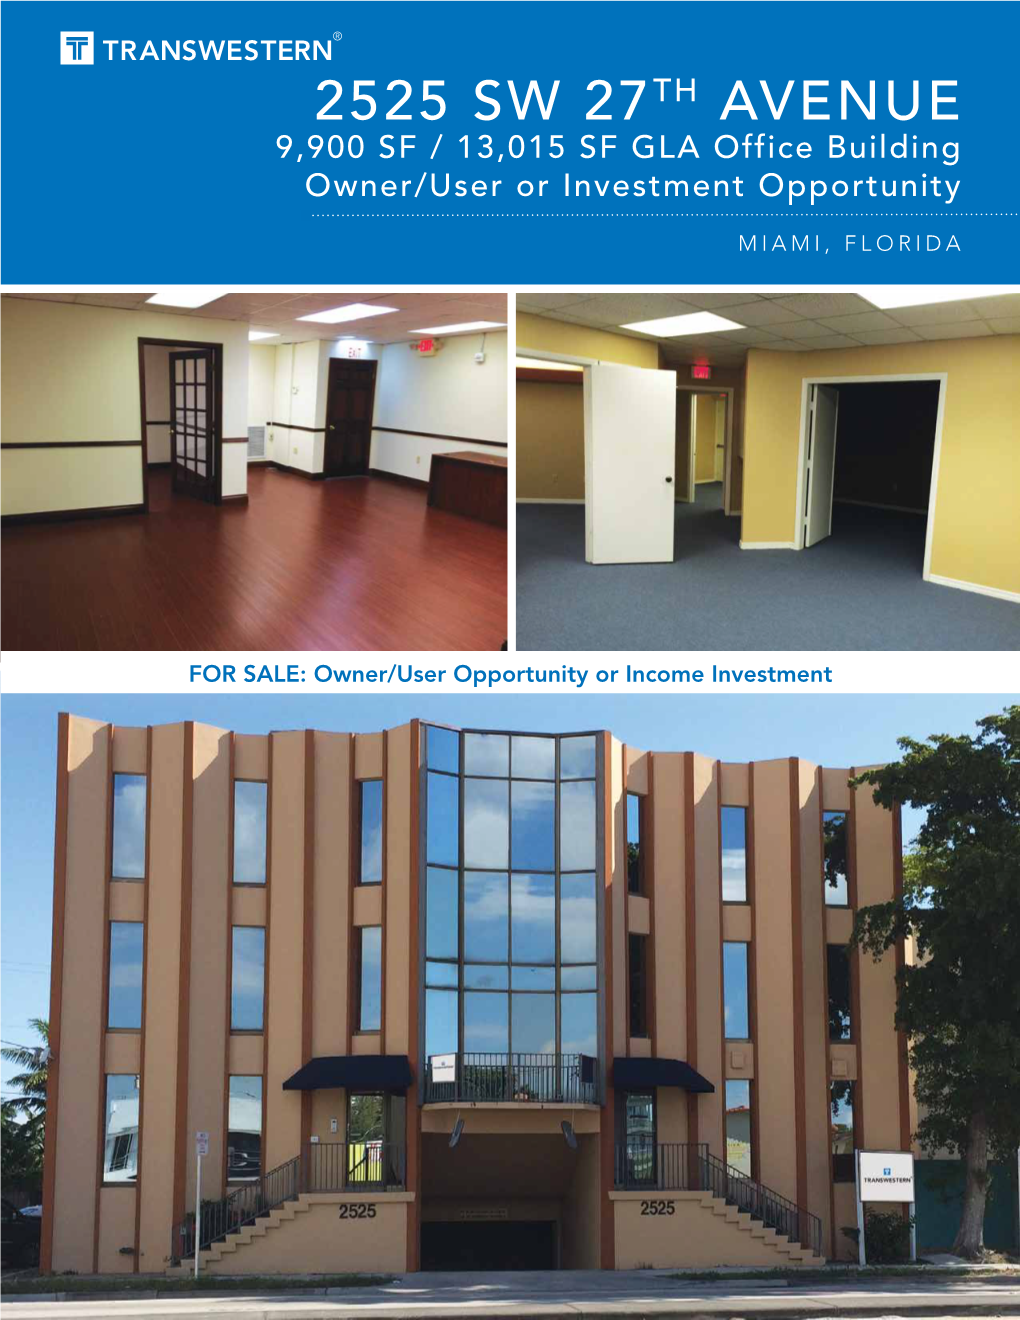 2525 SW 27TH AVENUE 9,900 SF / 13,015 SF GLA Office Building Owner/User Or Investment Opportunity